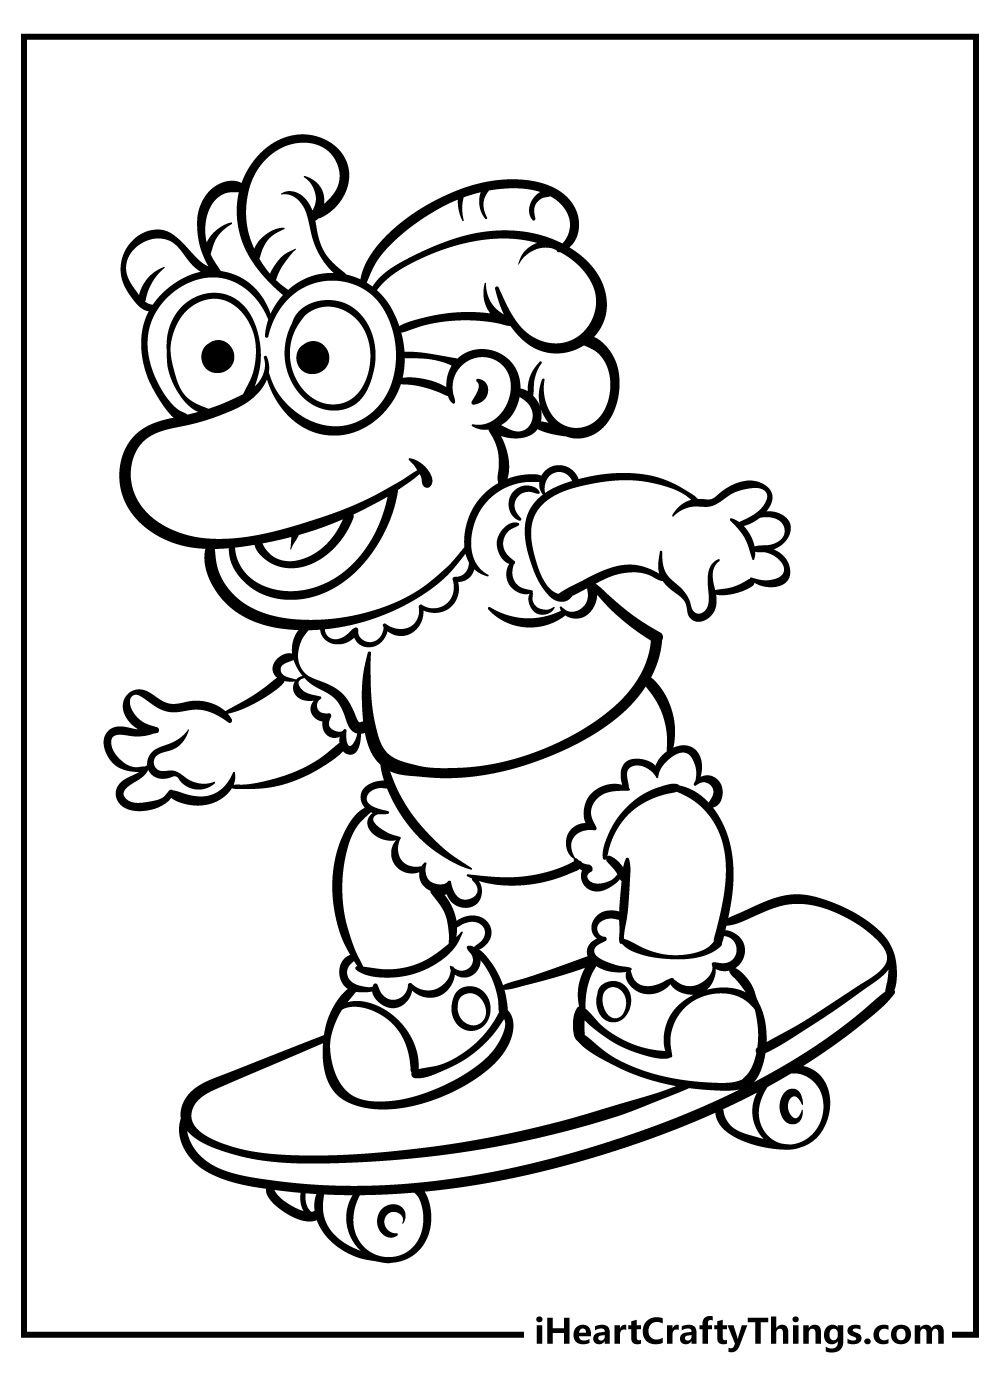 Muppet Babies Coloring Book for adults free download